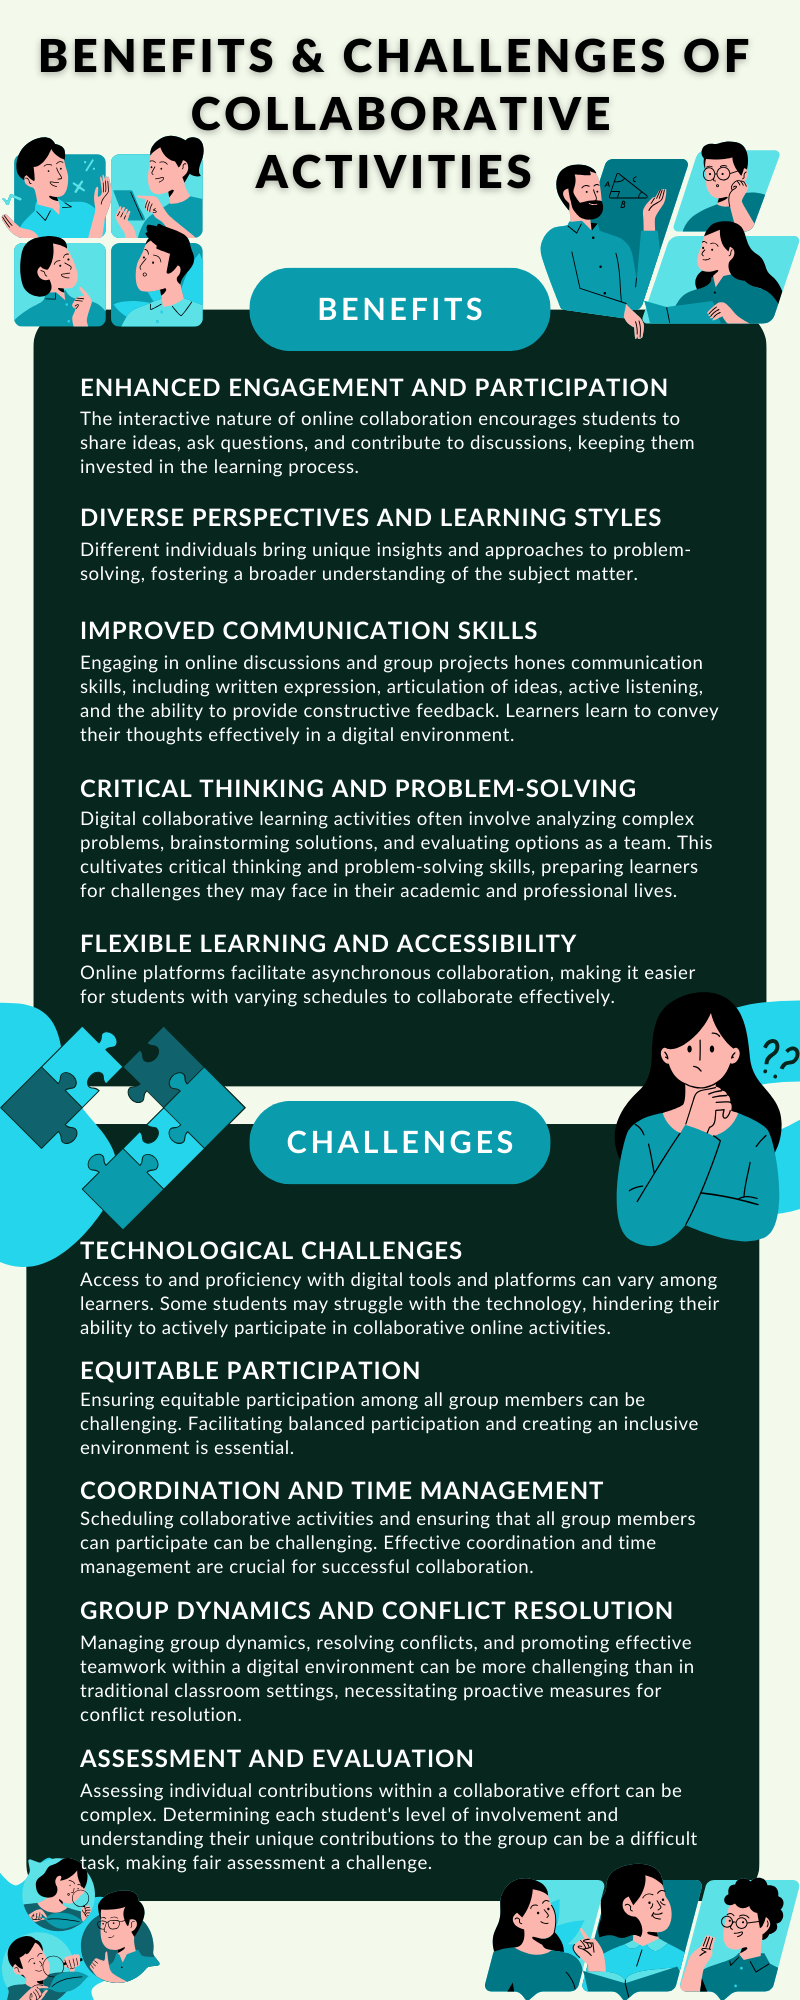 BENEFITS AND CHALLENGES OF COLLABORATIVE LEARNING ACTIVITIES